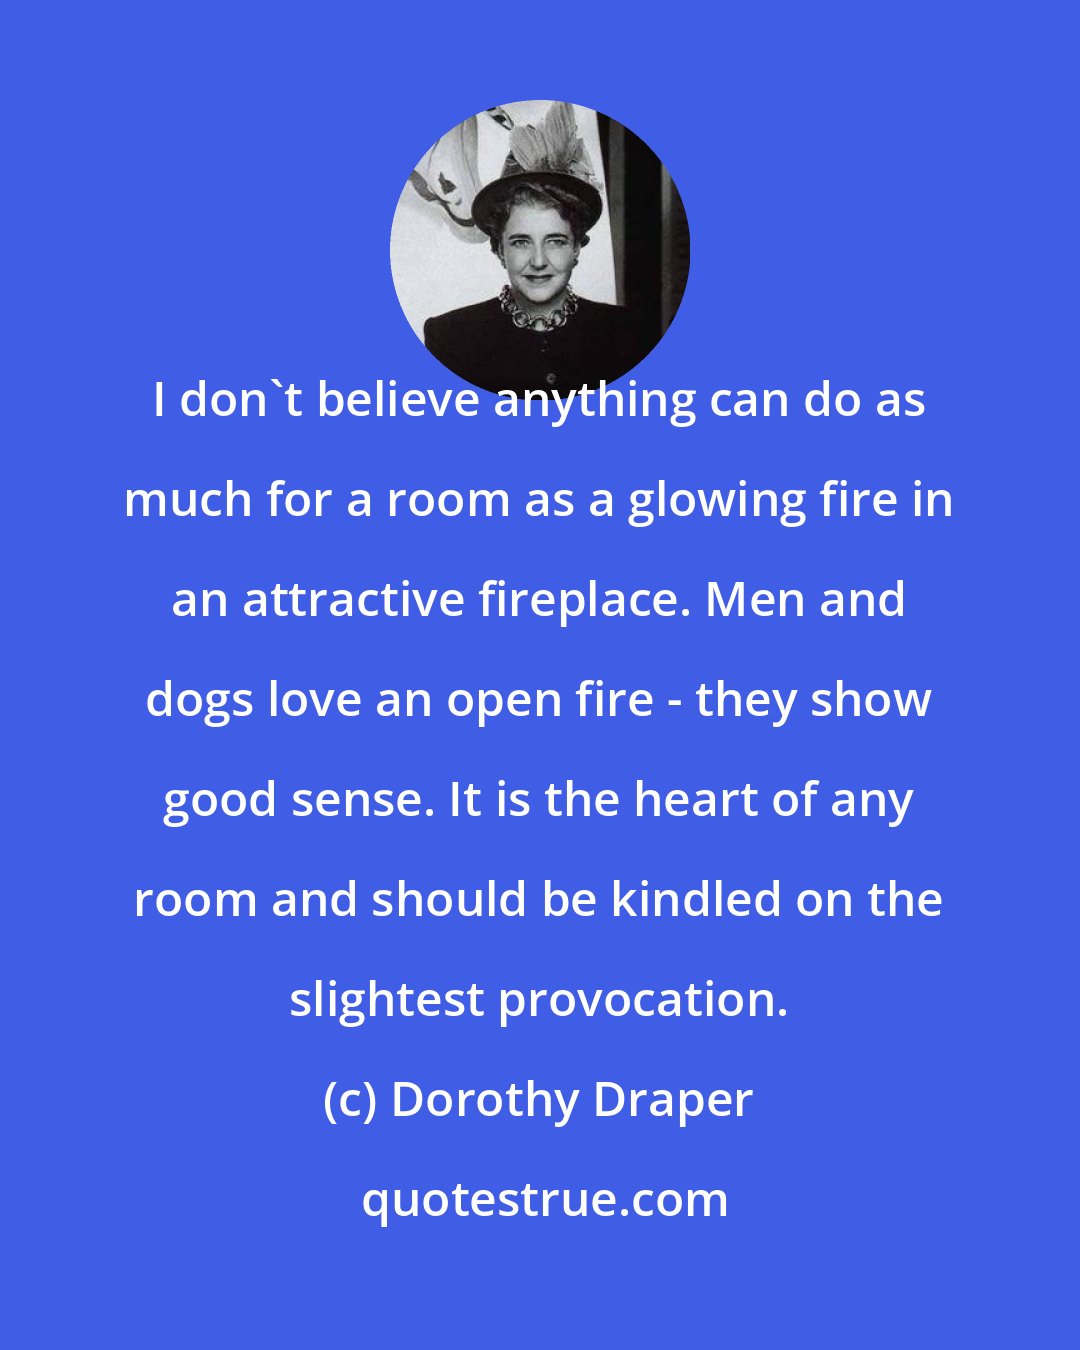 Dorothy Draper: I don't believe anything can do as much for a room as a glowing fire in an attractive fireplace. Men and dogs love an open fire - they show good sense. It is the heart of any room and should be kindled on the slightest provocation.